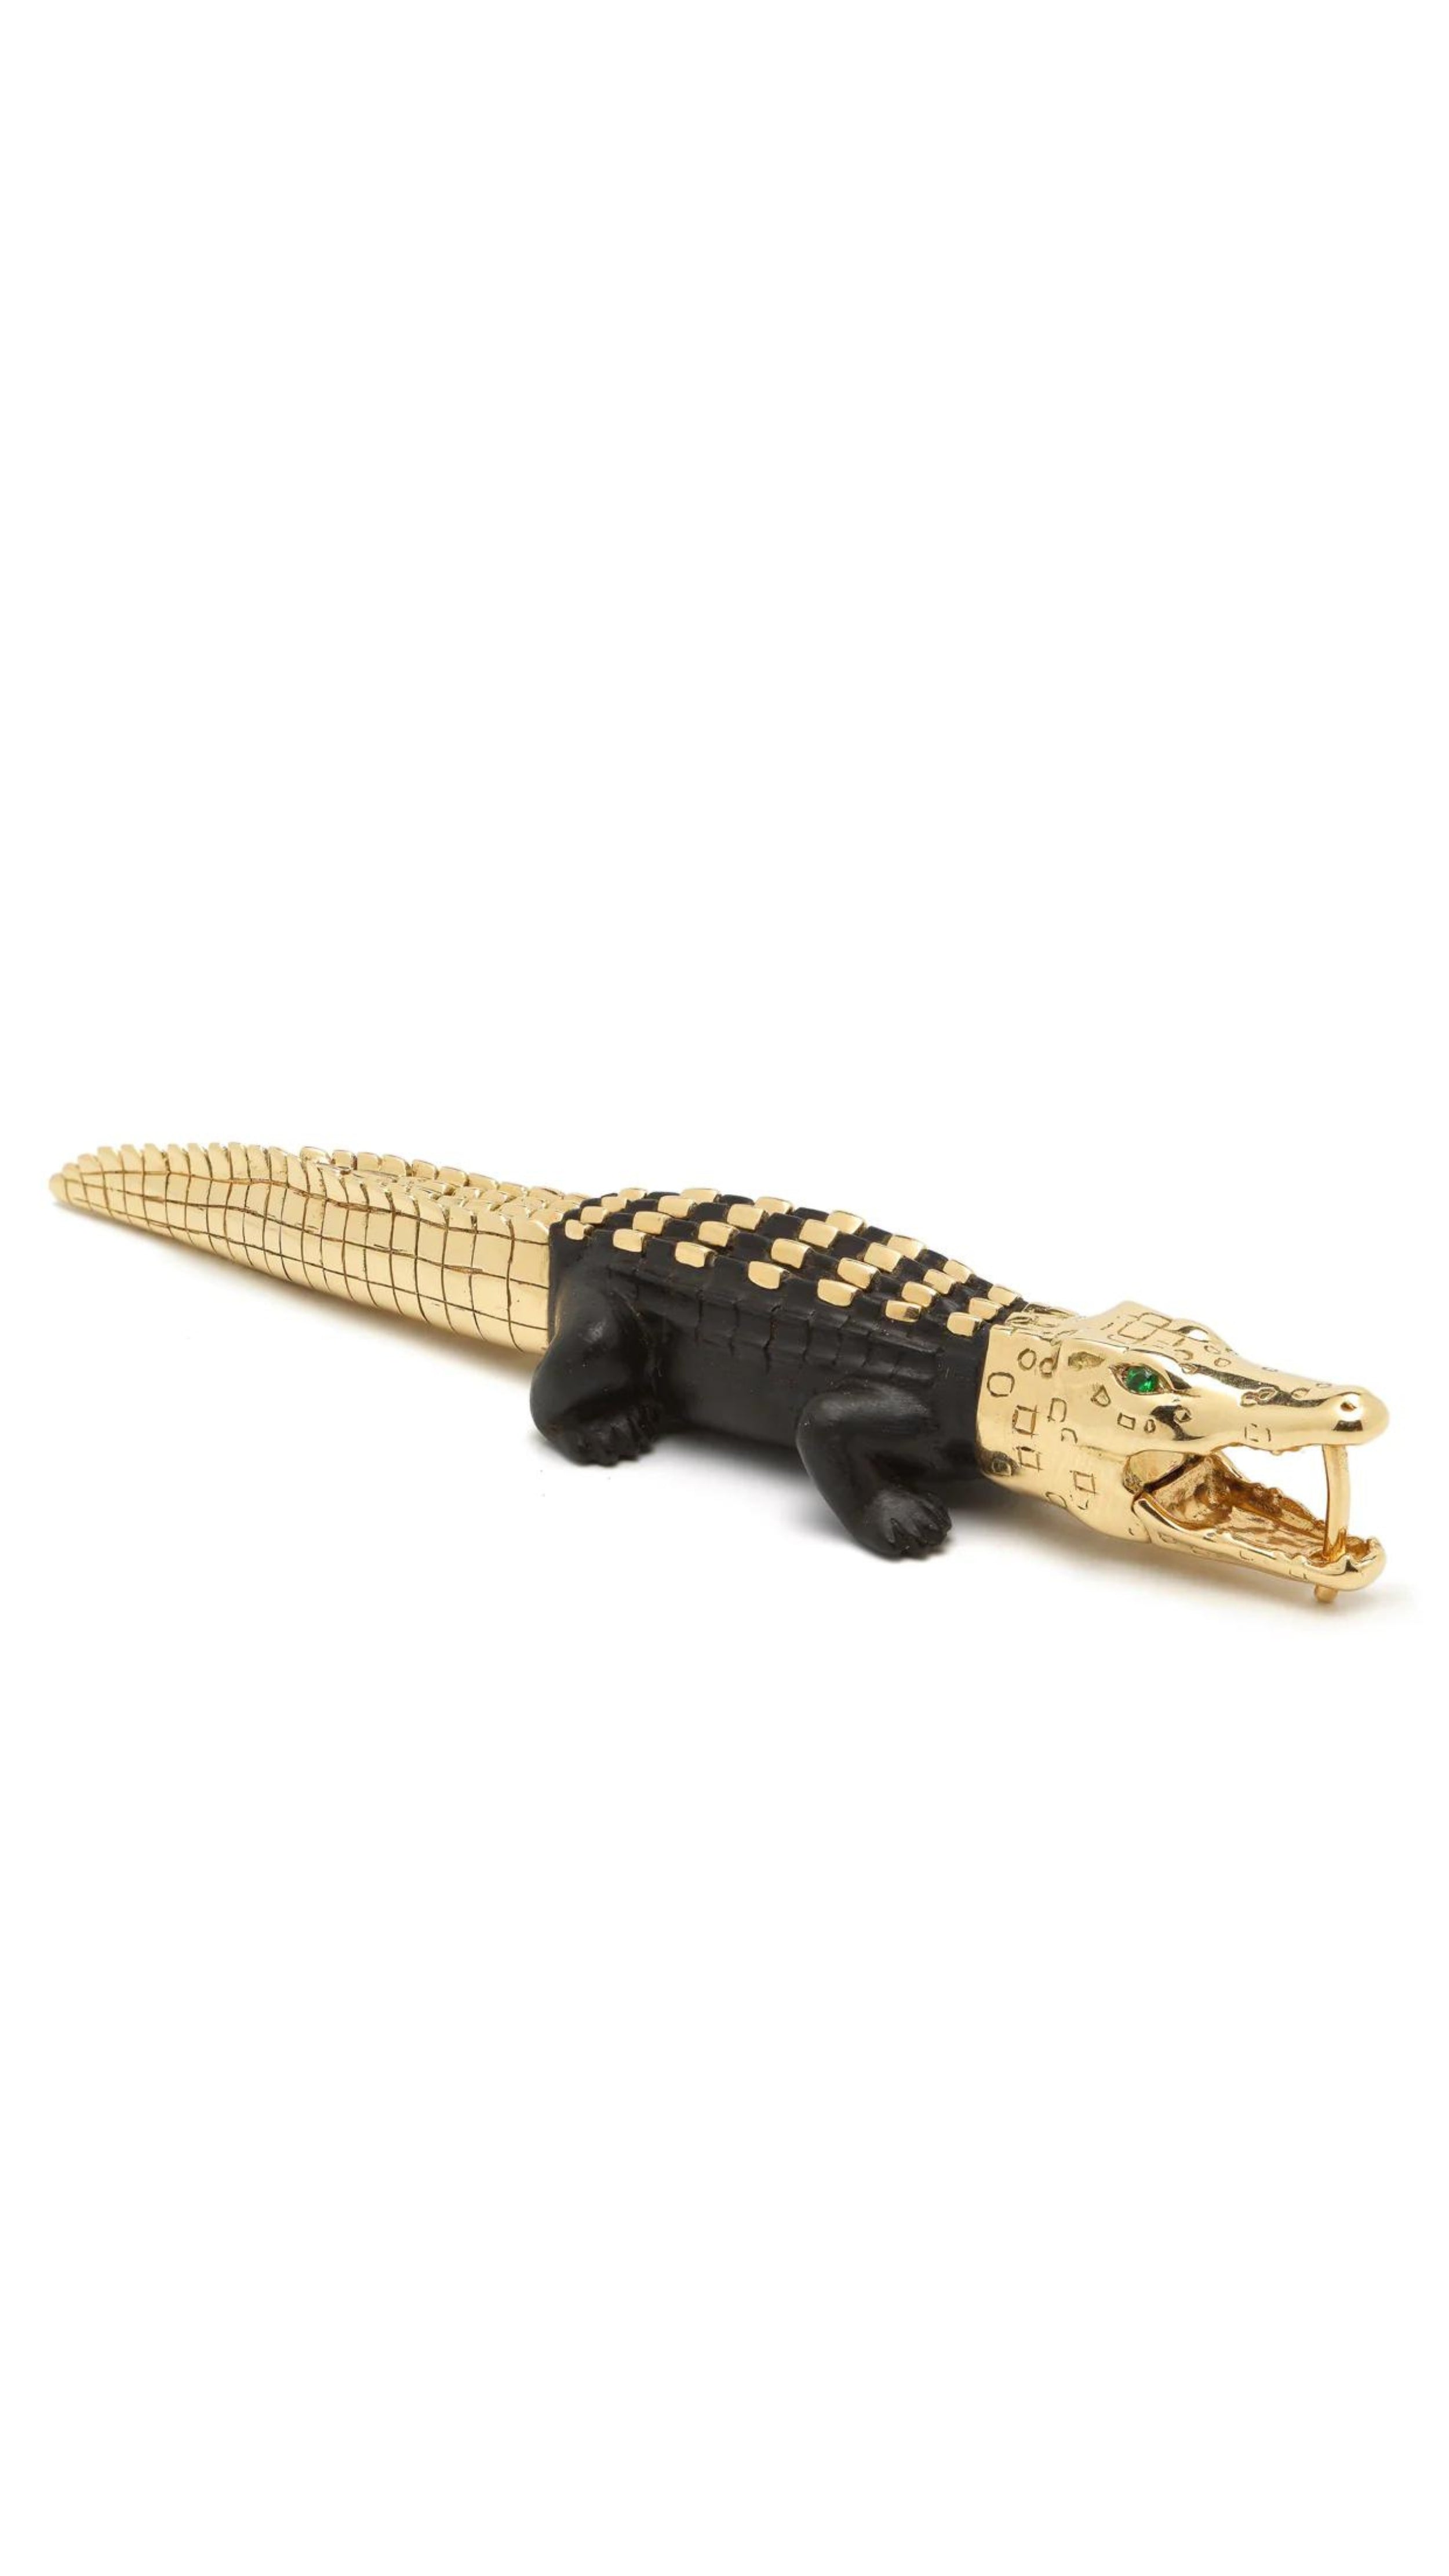 Bibi van der Velden, Ebony Wood Large Alligator Bite Earring with Studs. Crafted in 18K Gold and with an ebony wood body in the shape of an alligator. The gold head is highlighted with green tsavorite stones. The tail is gold scaled. Shown from the side view sitting.